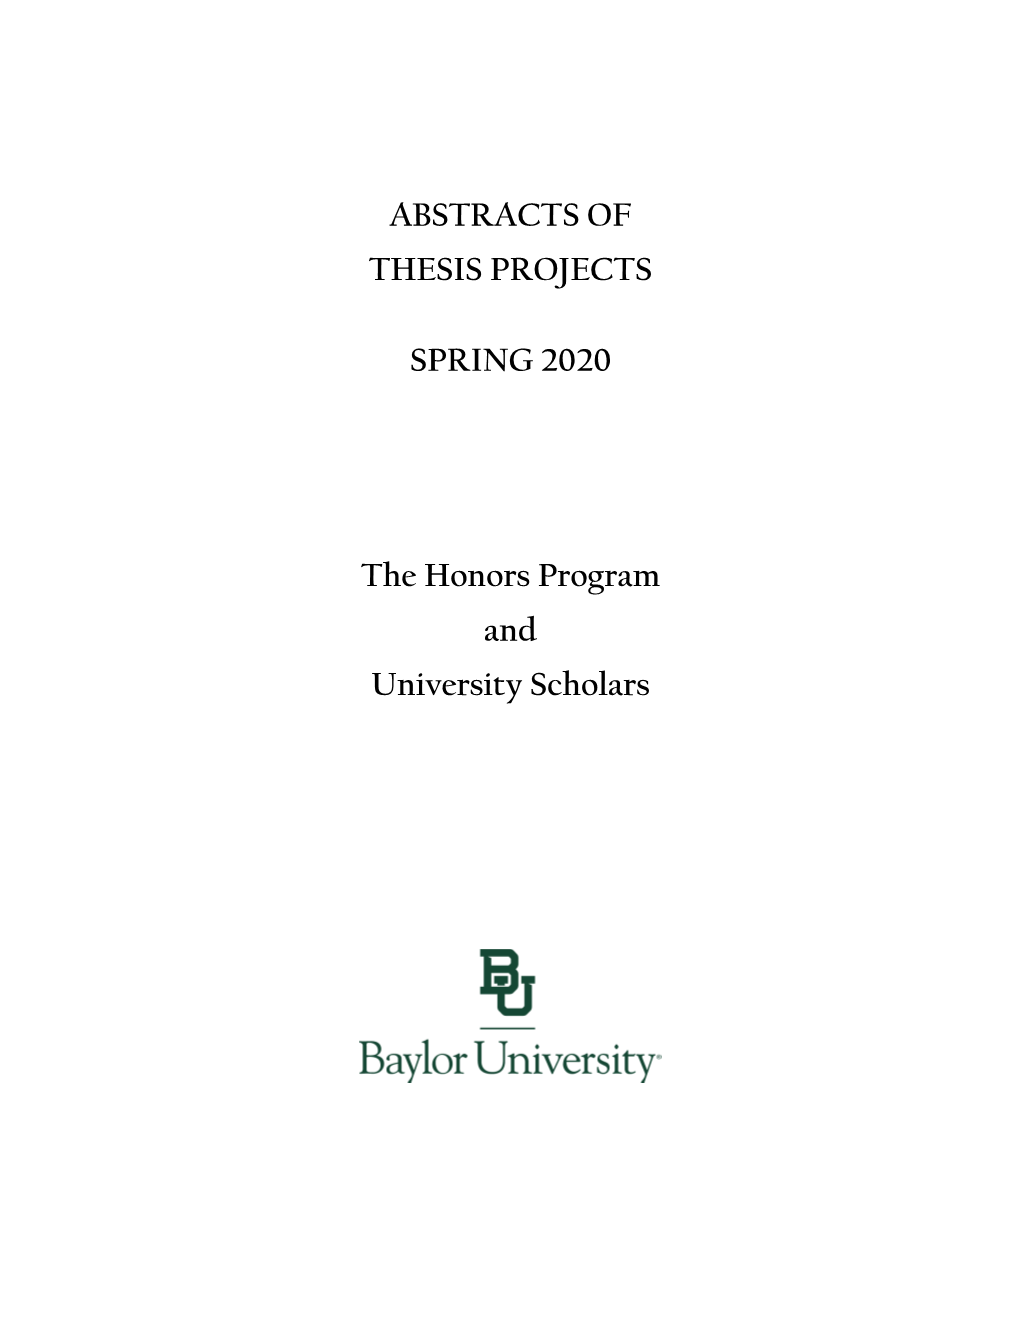 ABSTRACTS of THESIS PROJECTS SPRING 2020 the Honors Program